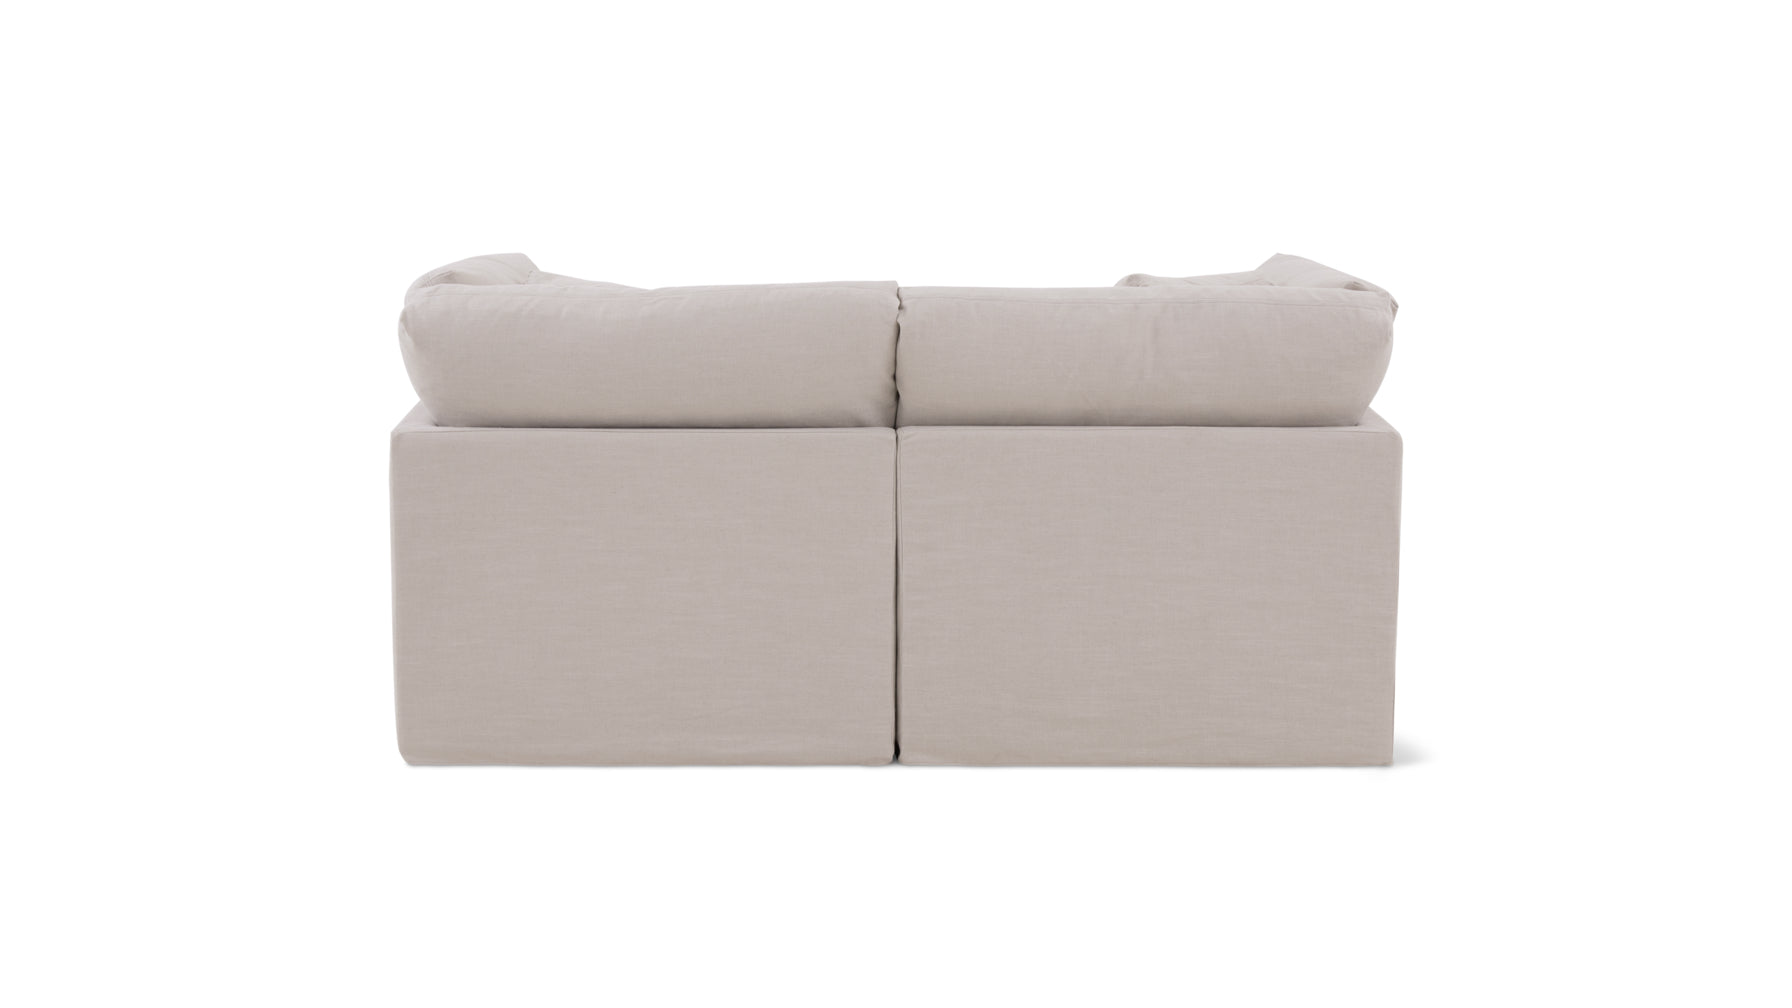 Get Together™ 3-Piece Modular Sectional, Standard, Clay - Image 7